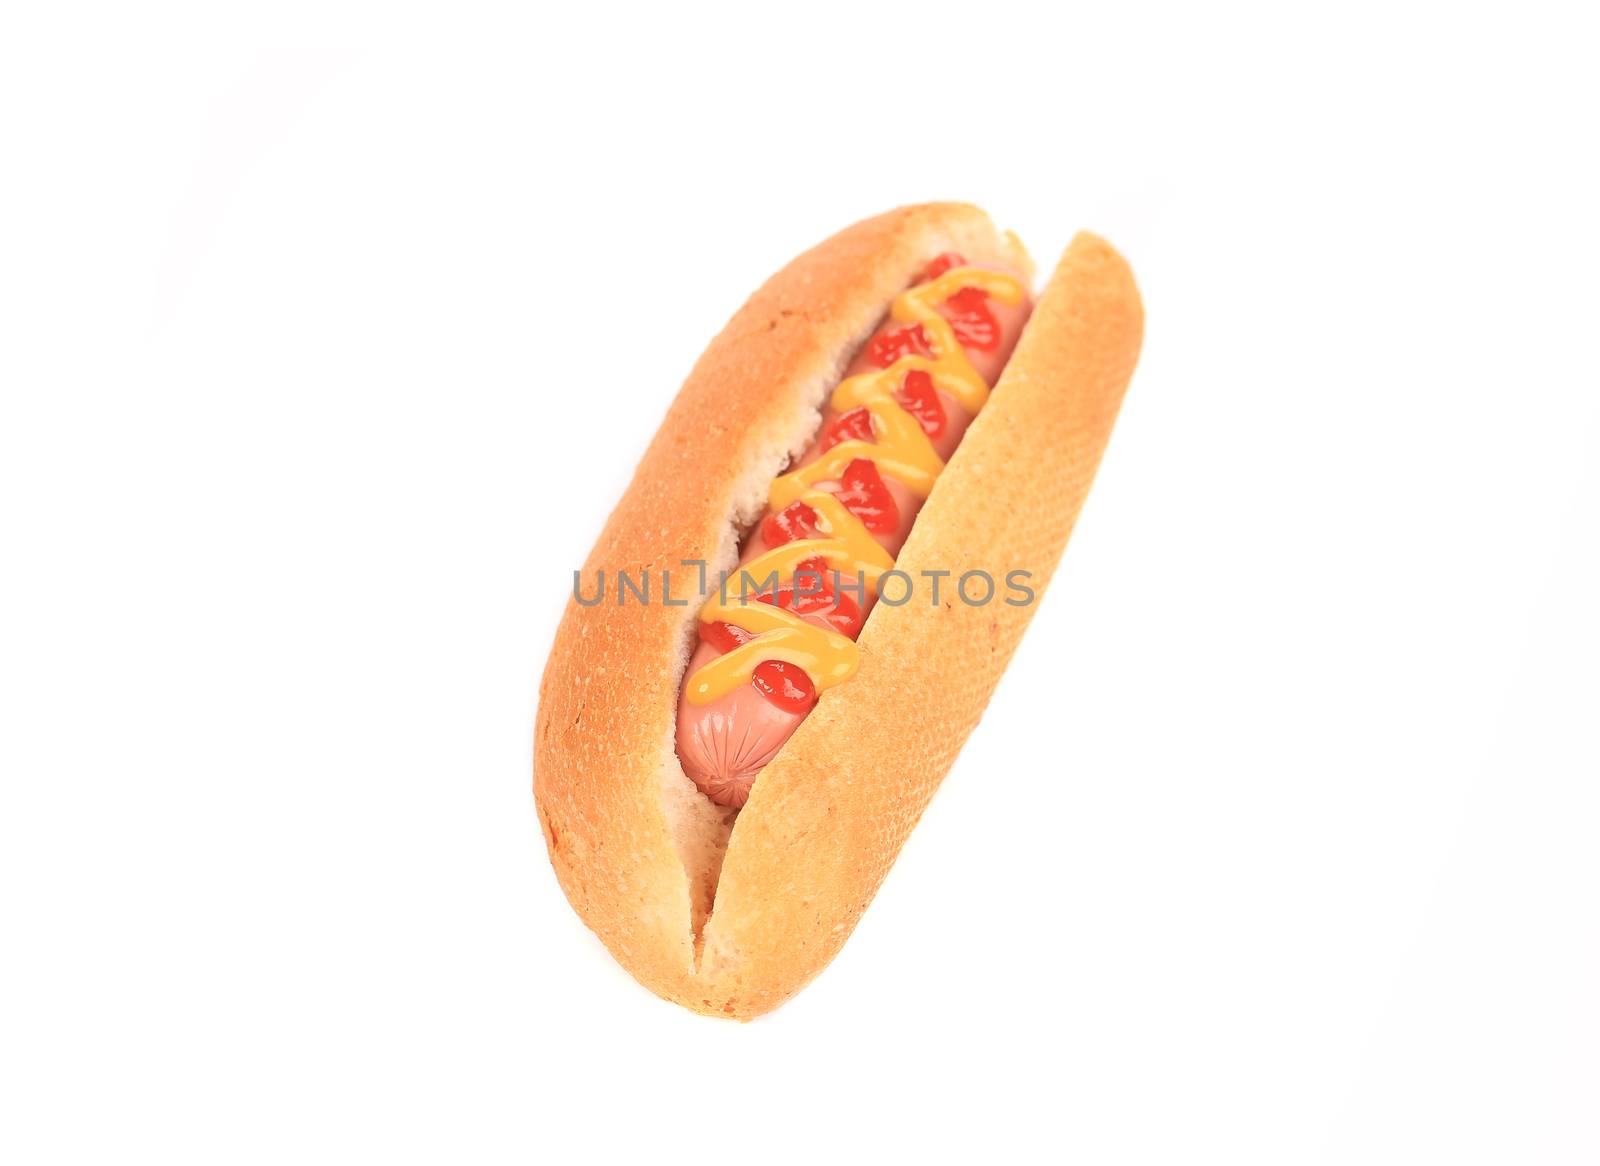 Delicious hot dog with mustard and ketchup. Isolated on a white background.